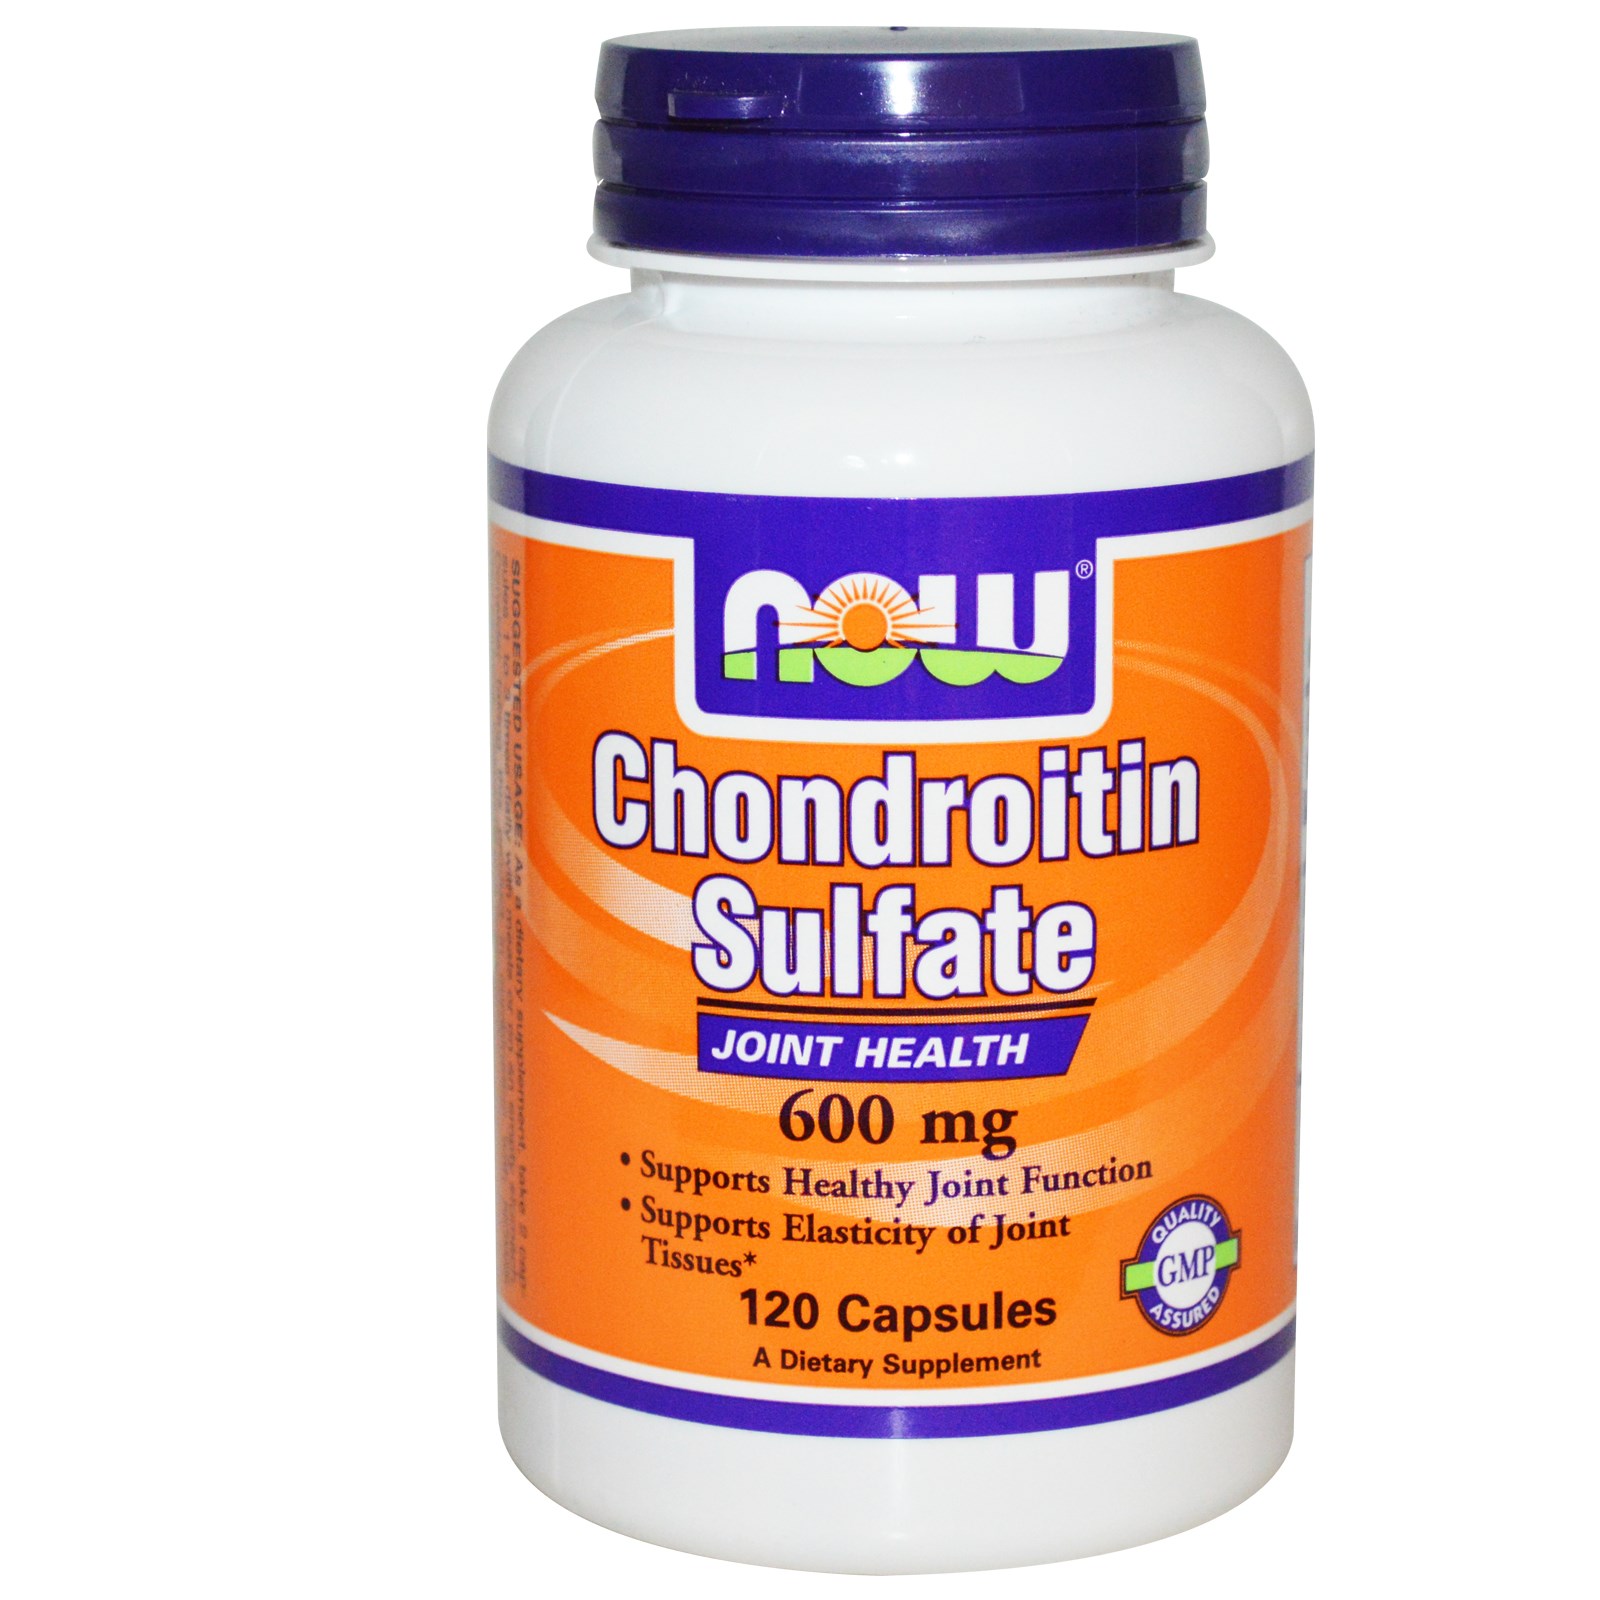 Chondroitin Sulfate Accumulation and Astounding Effects